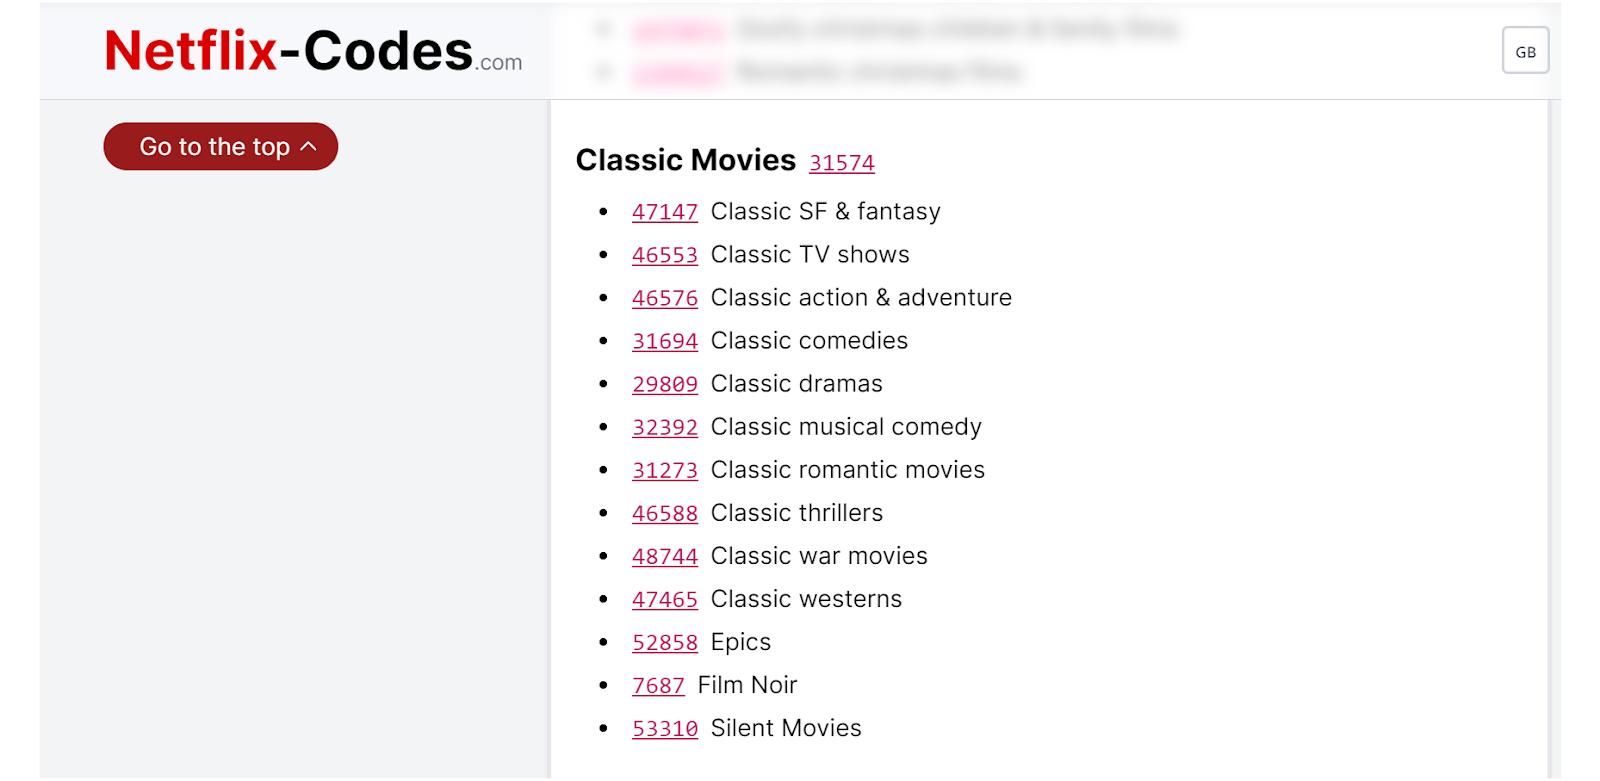 Screenshot of Netflix Codes for classic movies.